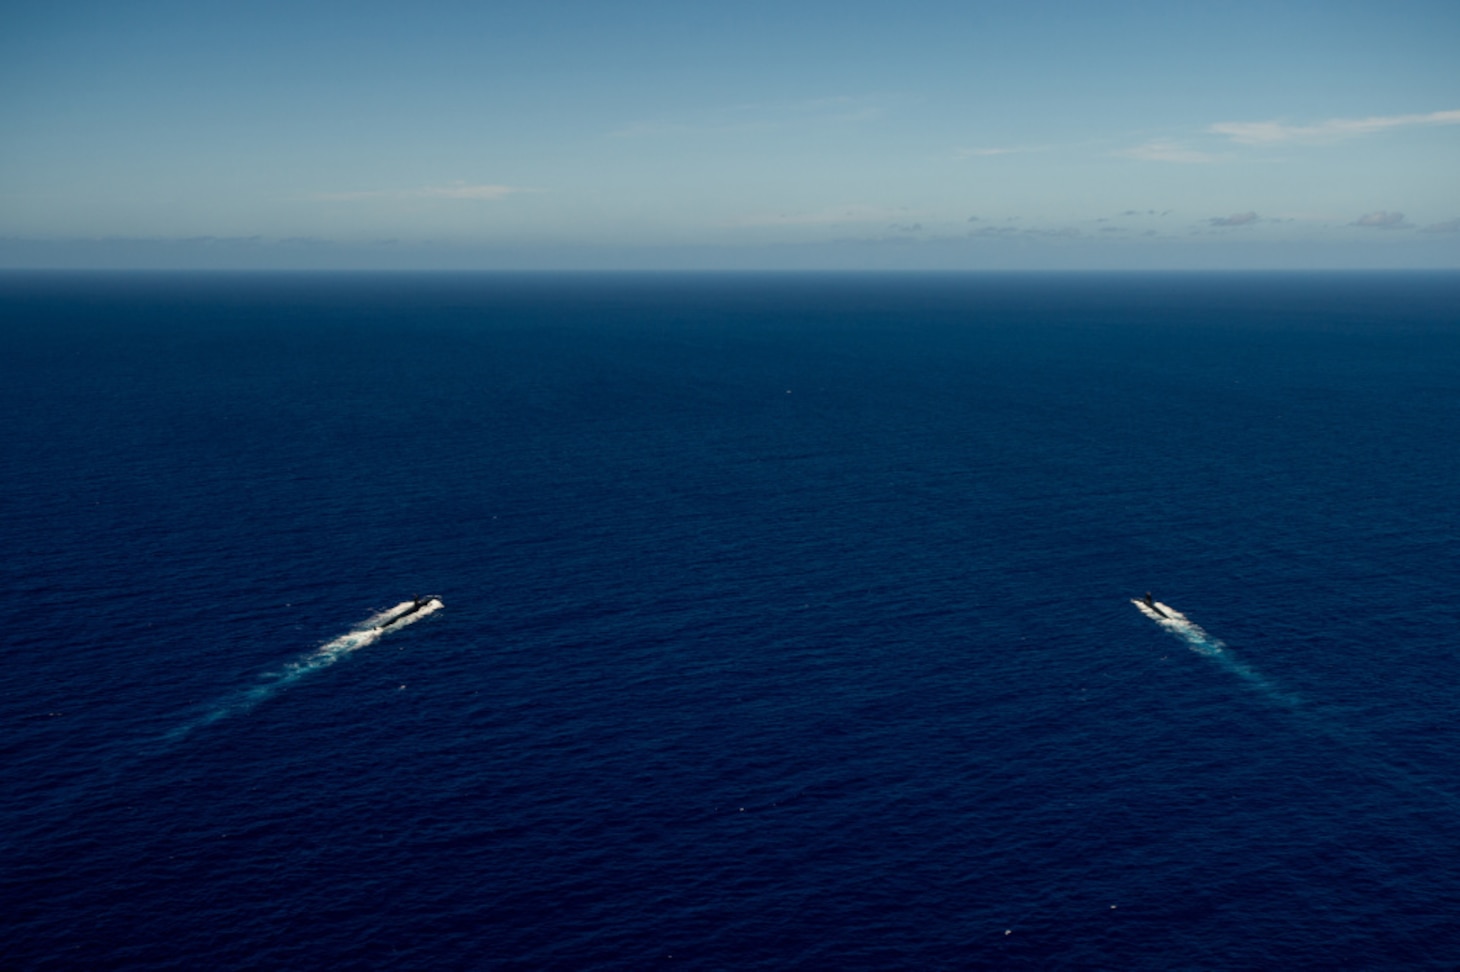 WATERS OFF GUAM (Dec. 11, 2020) The Los Angeles-class fast-attack submarine USS Asheville (SSN 758), left, and the French Navy Rubis-class nuclear powered submarine (SSN) Émeraude steam in formation off the coast of Guam during a photo exercise. Asheville and Émeraude practiced high-end maritime skills in a multitude of disciplines designed to enhance interoperability between maritime forces. Asheville is one of four forward-deployed submarines assigned to Commander, Submarine Squadron 15.